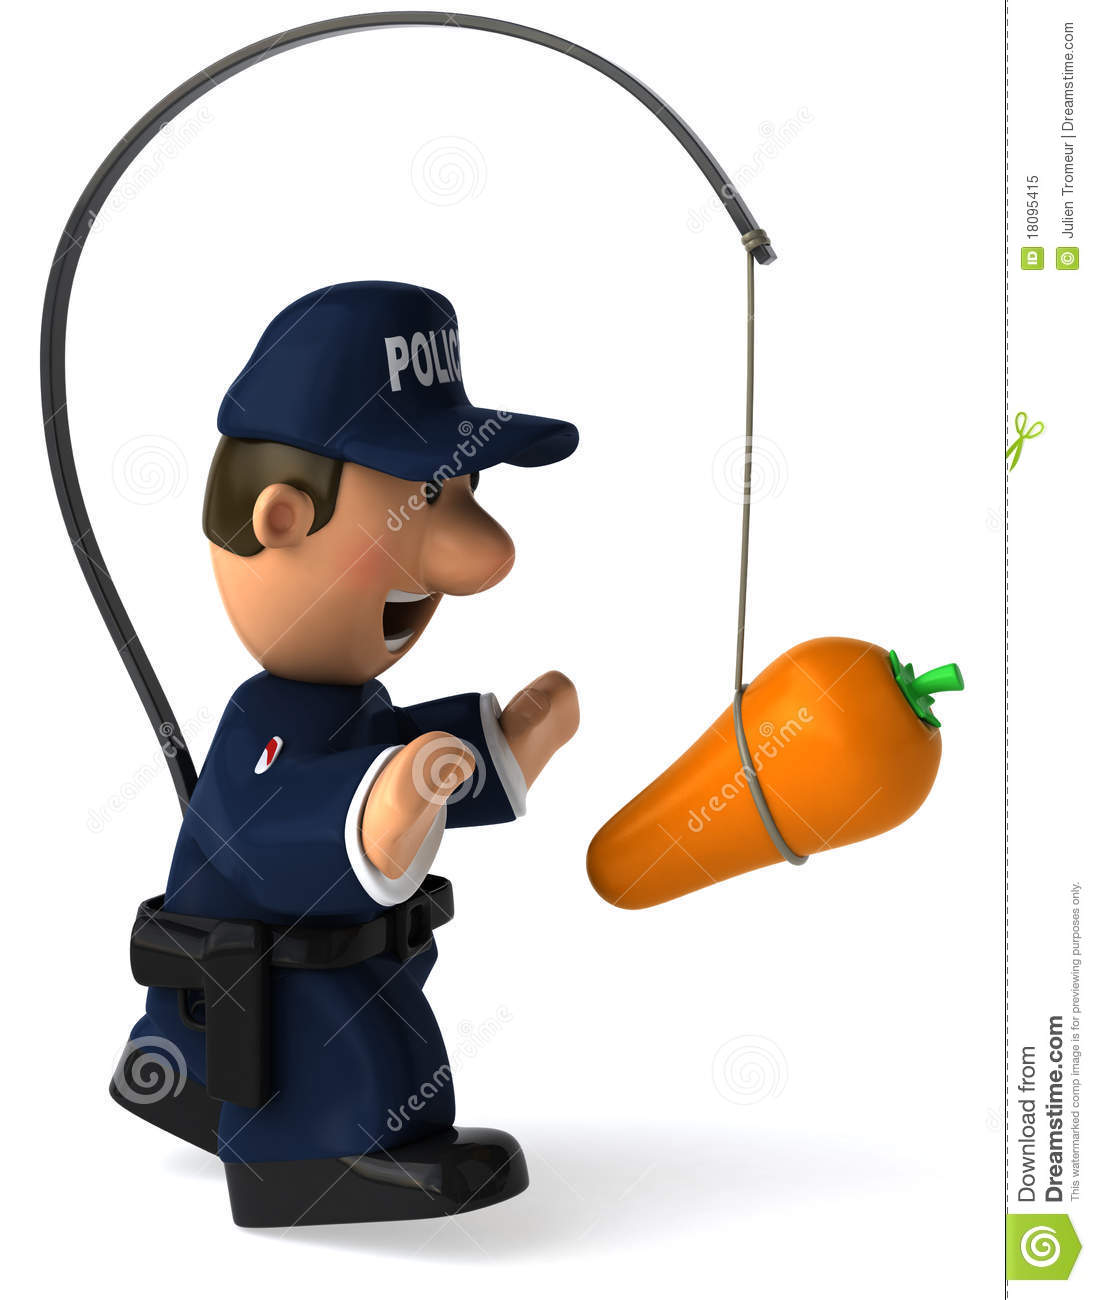 Police Officer Royalty Free Stock Photo   Image  18095415